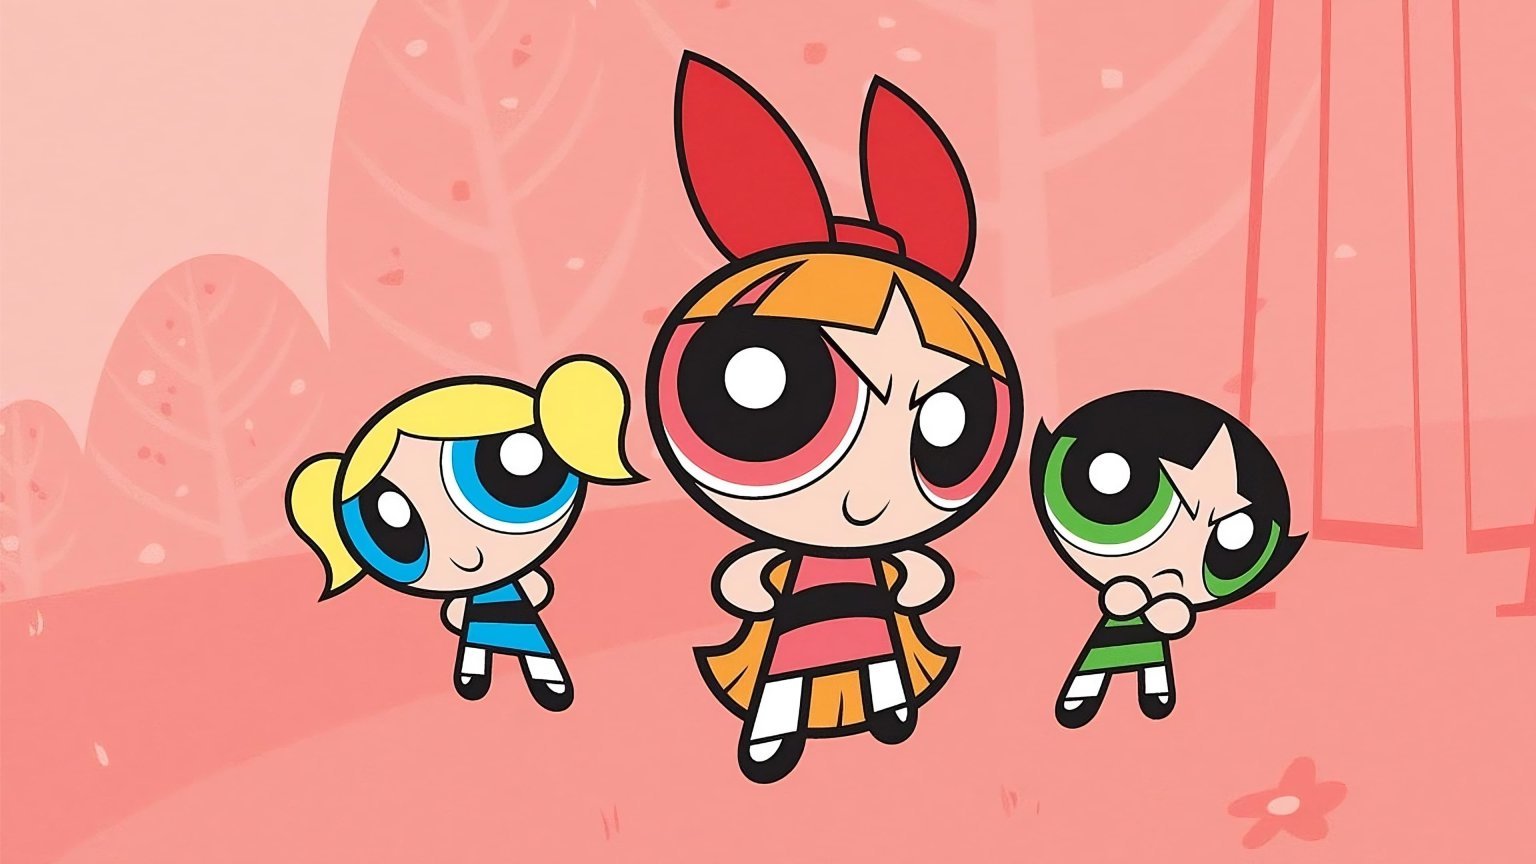 15+ Buttercup Ppg Aesthetic